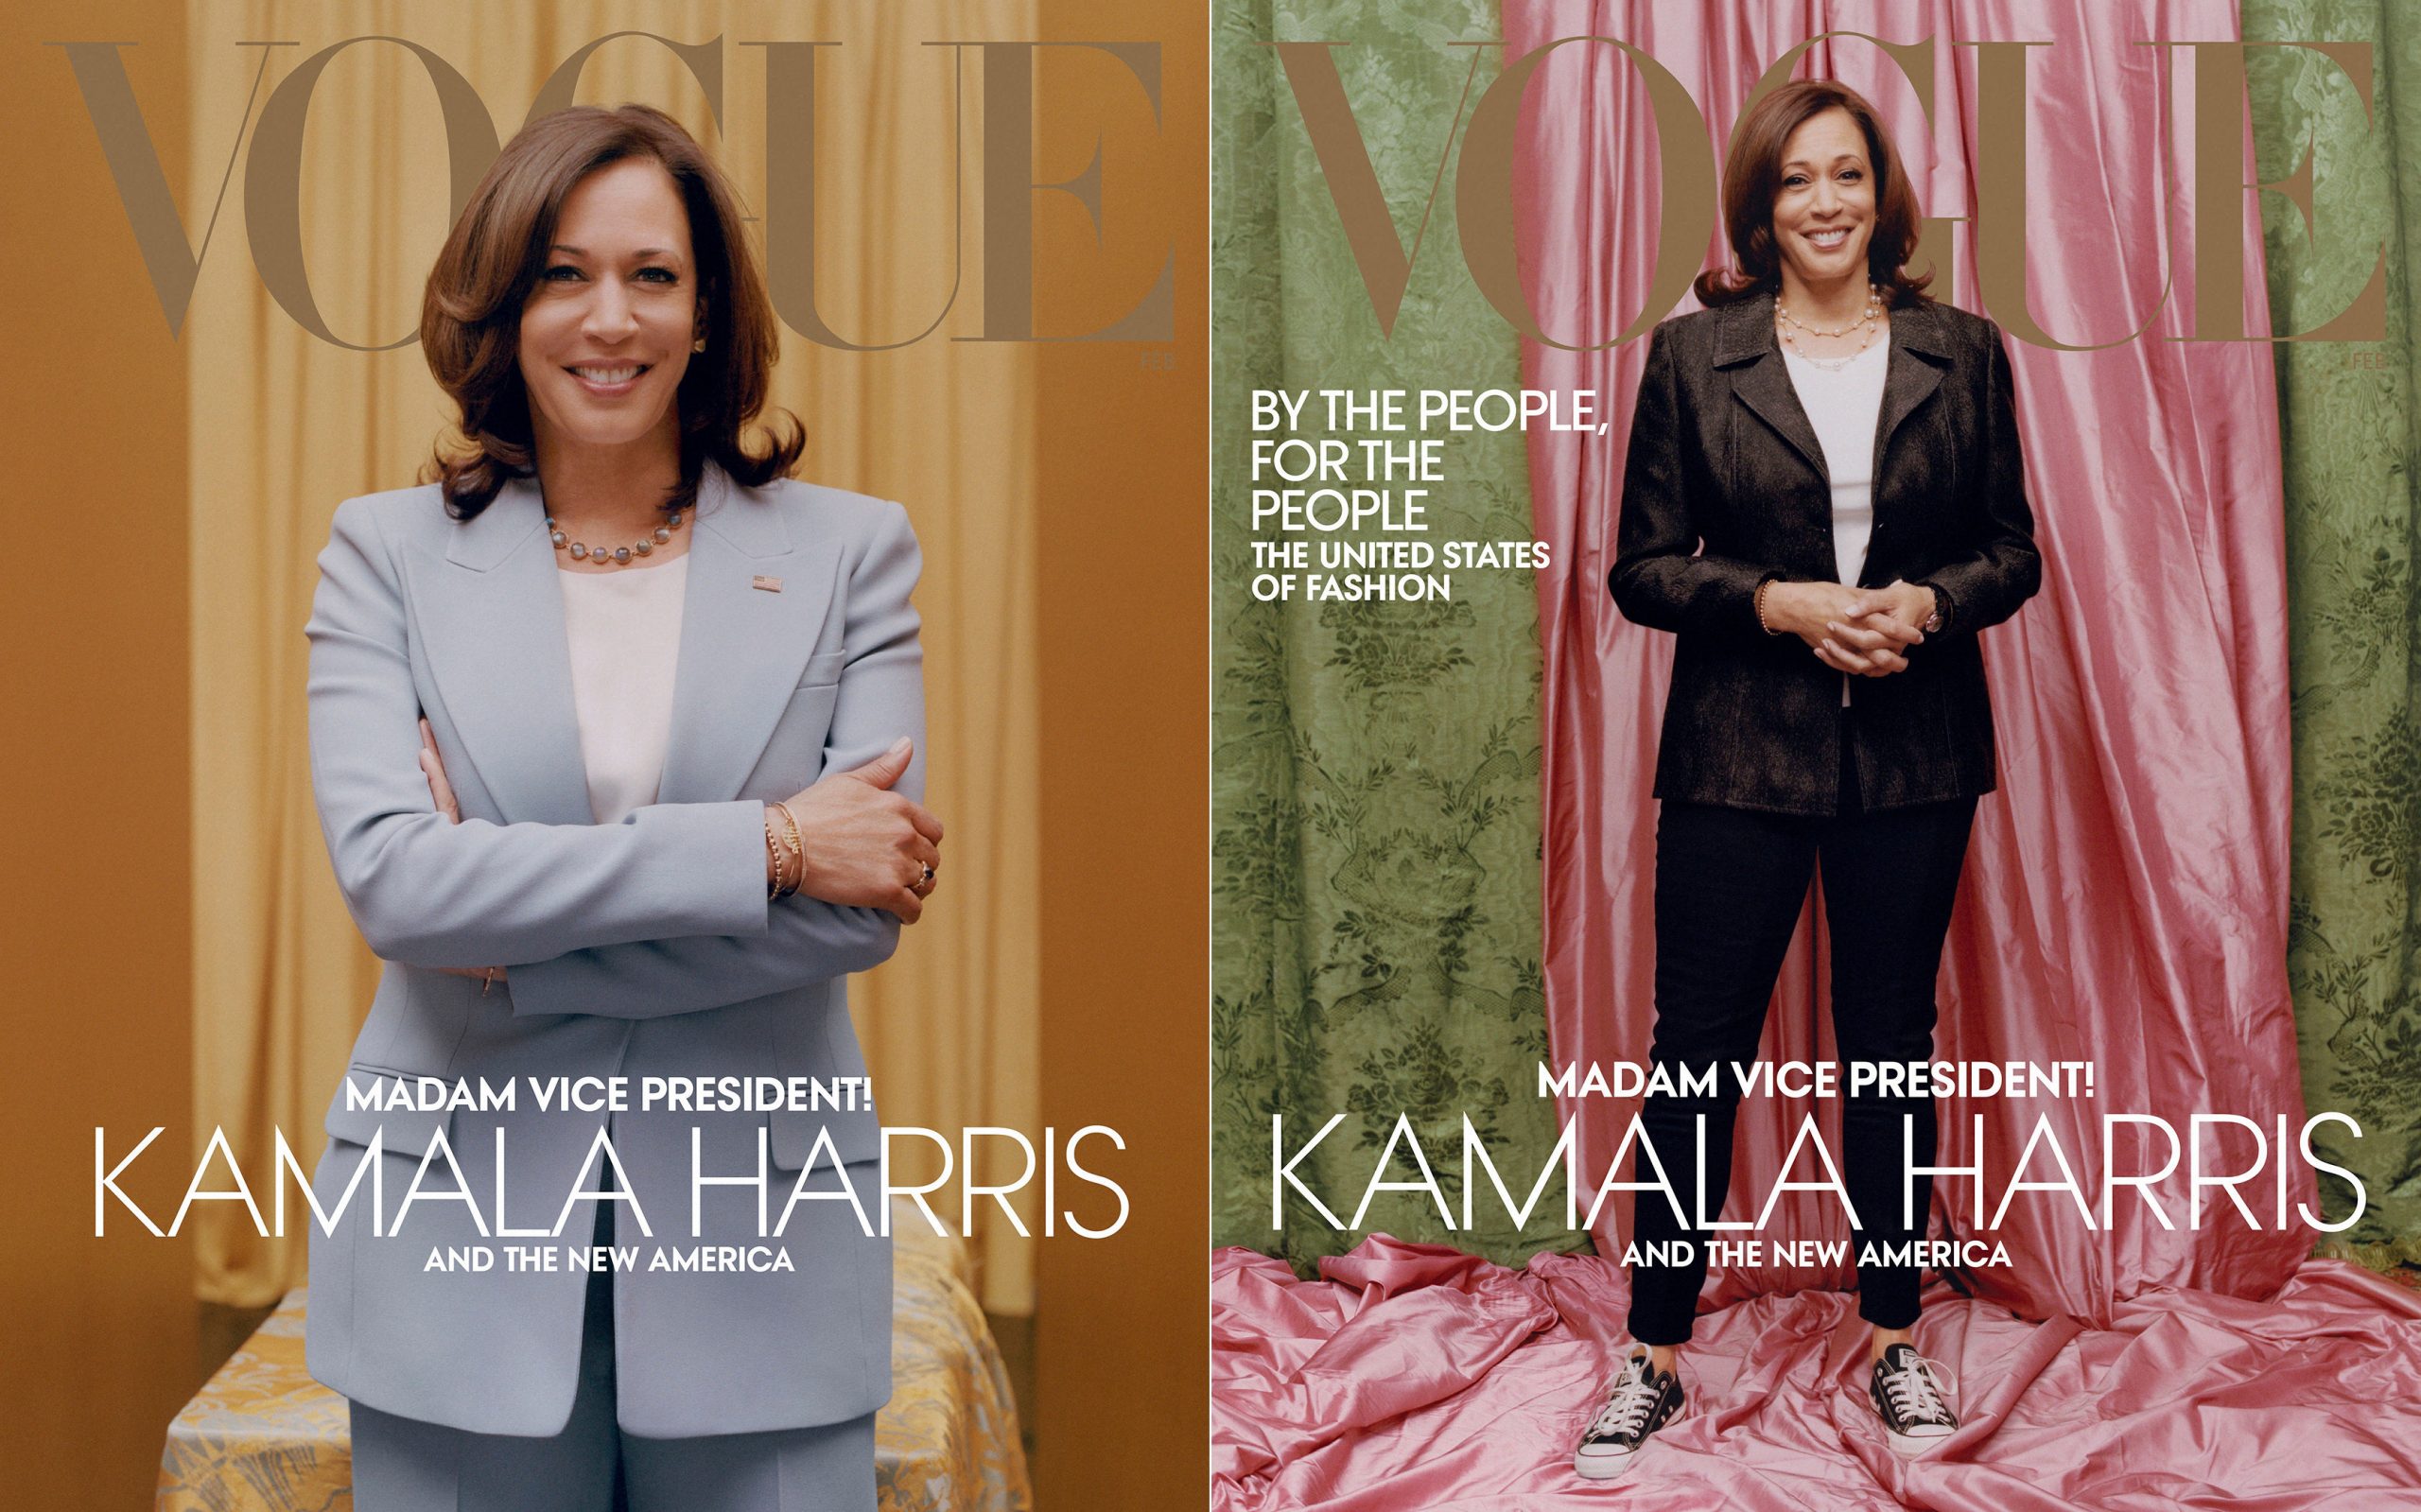 Vogue editor defends the cover photo of incoming VP Kamala Harris